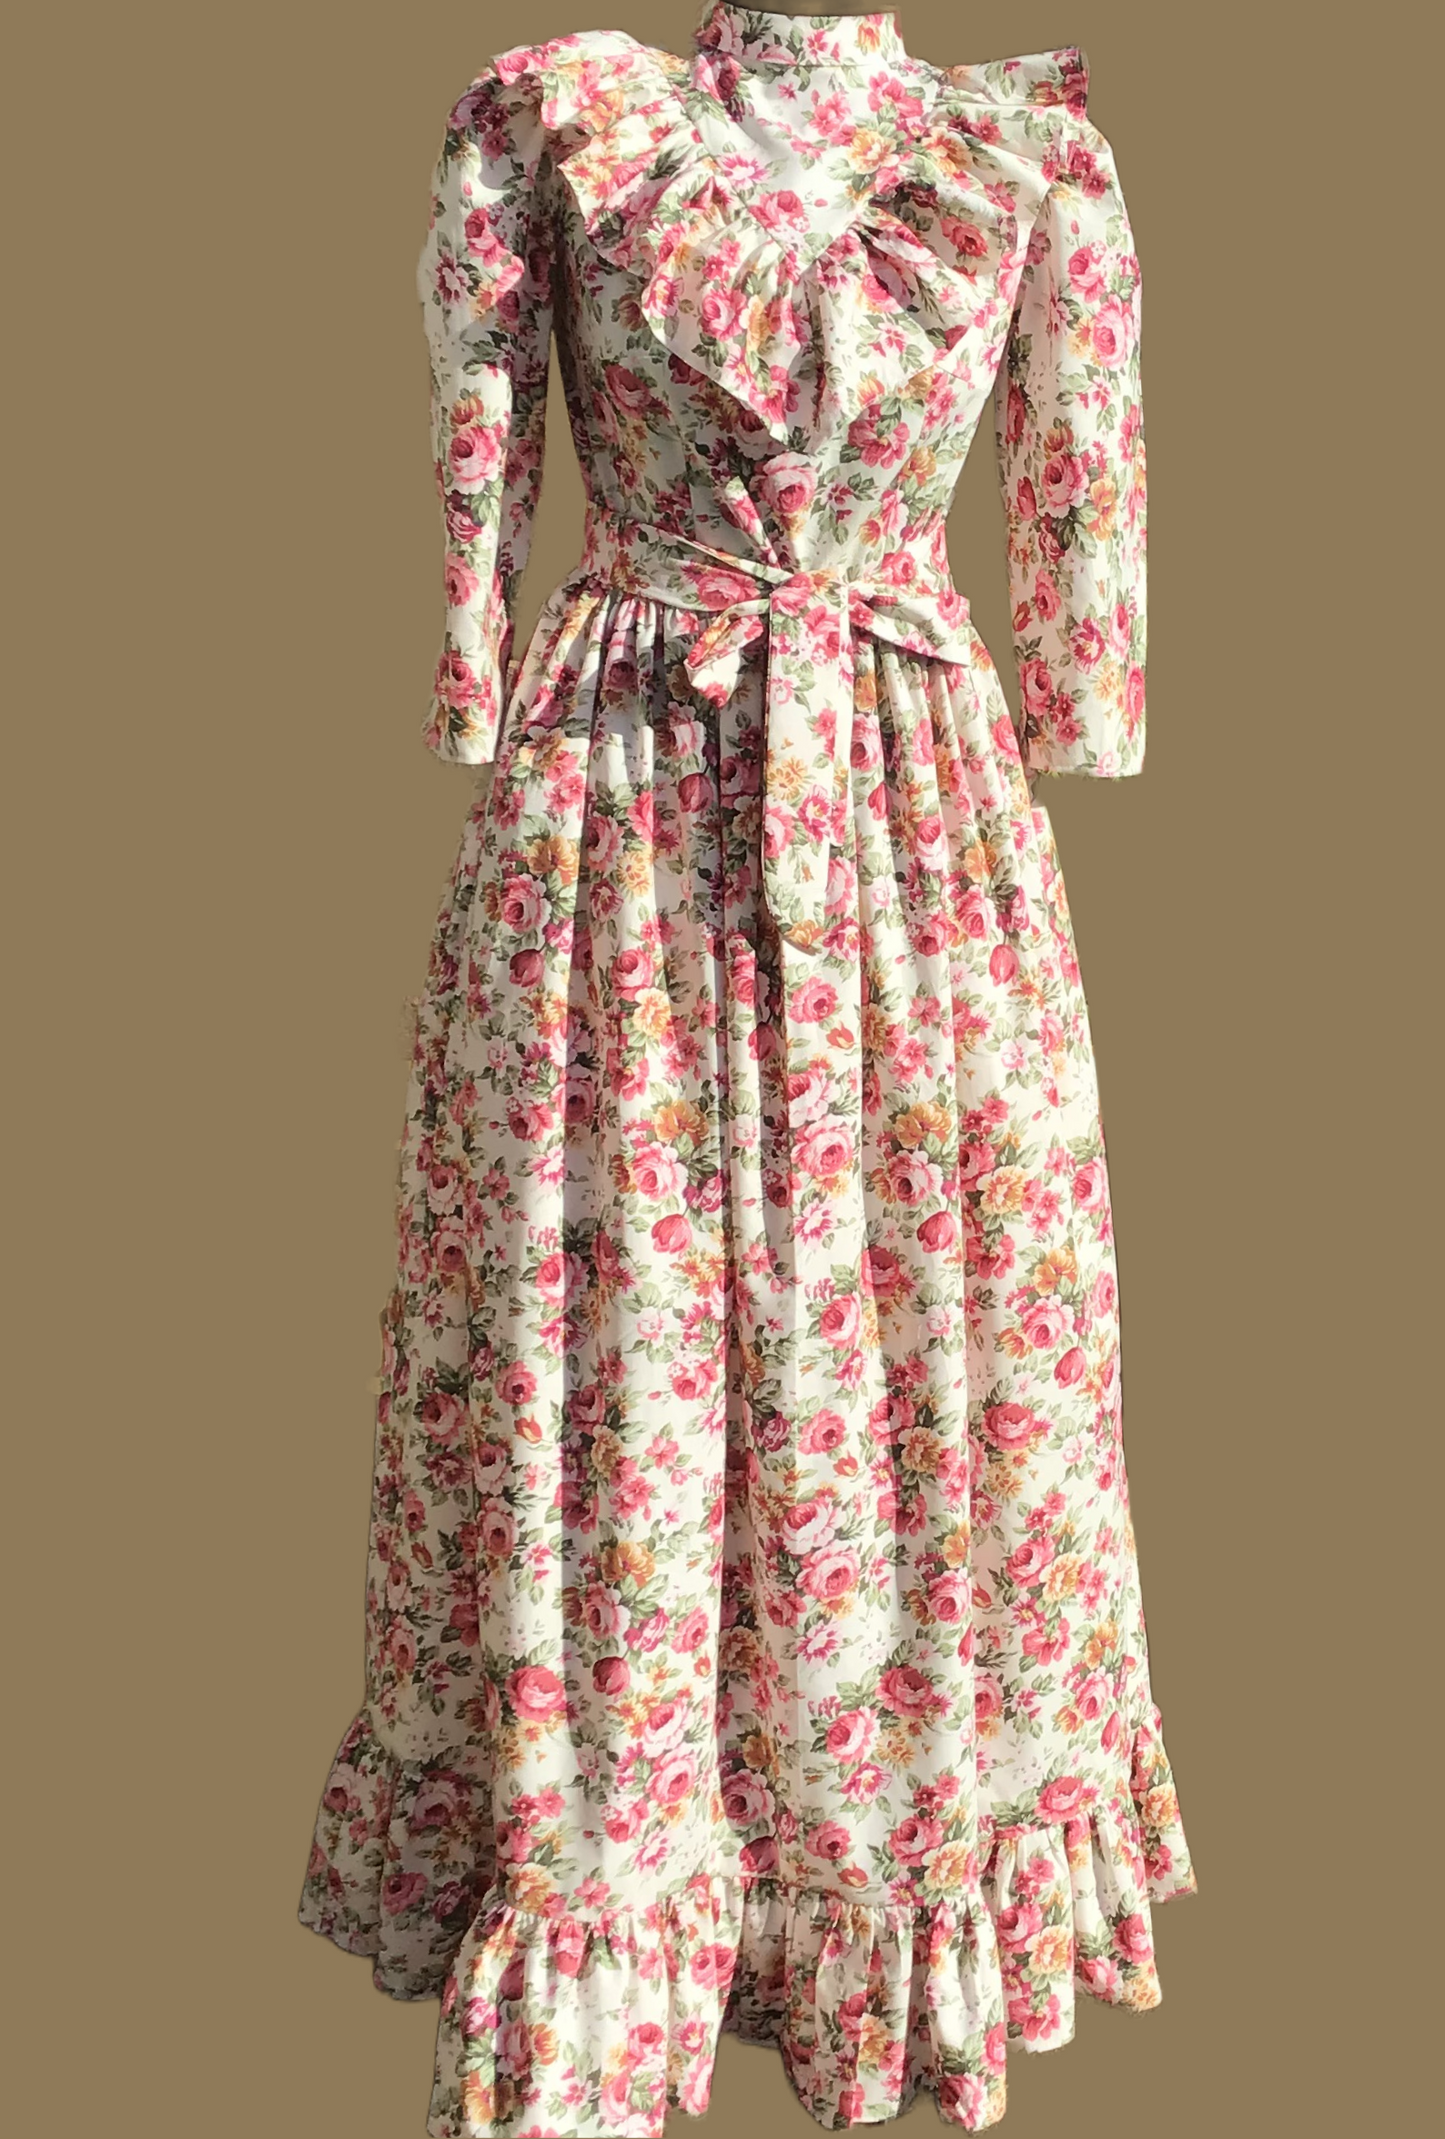 This Emmeline maxi dress has a timeless silhouette, with a vintage-style design taking its cues from Edwardian fashion